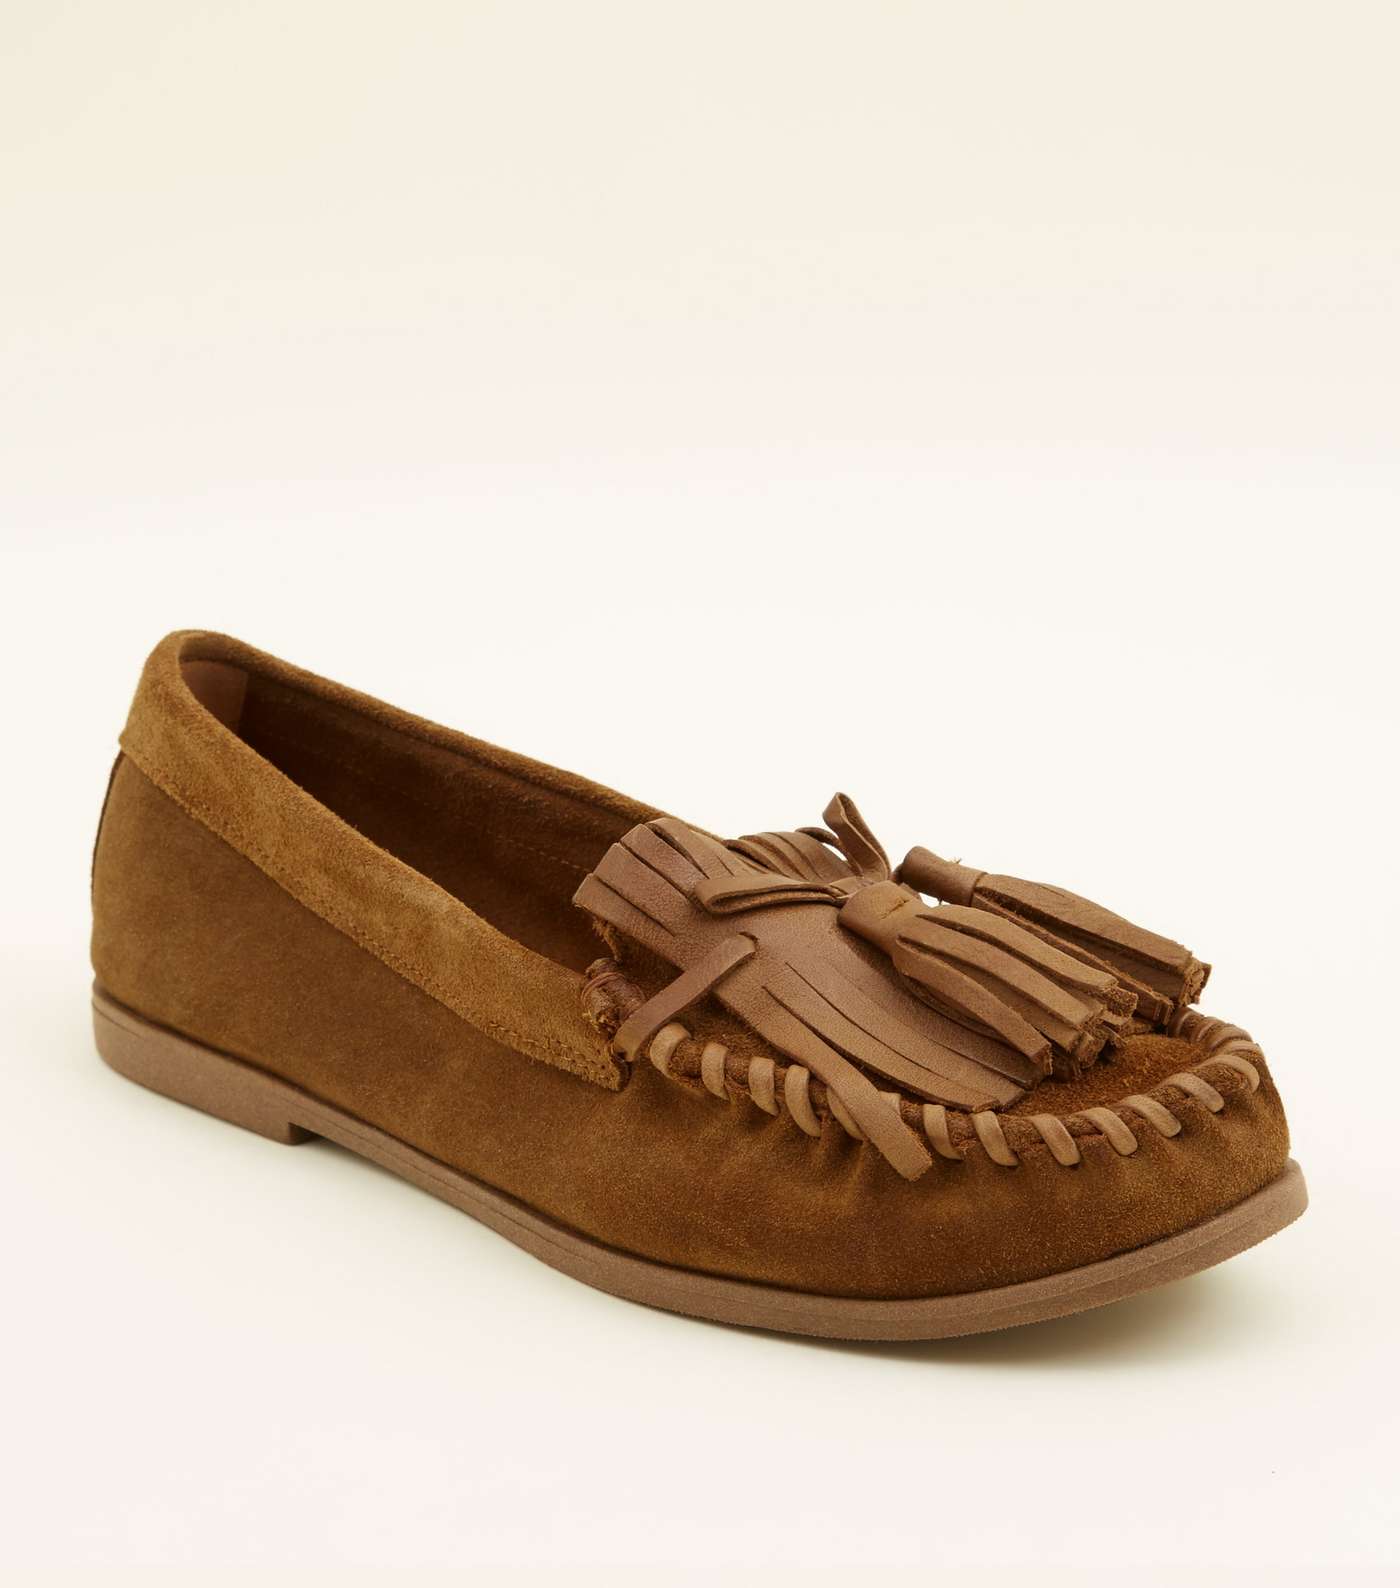 Tan Suede Whipstitch Fringe Trim Loafers 